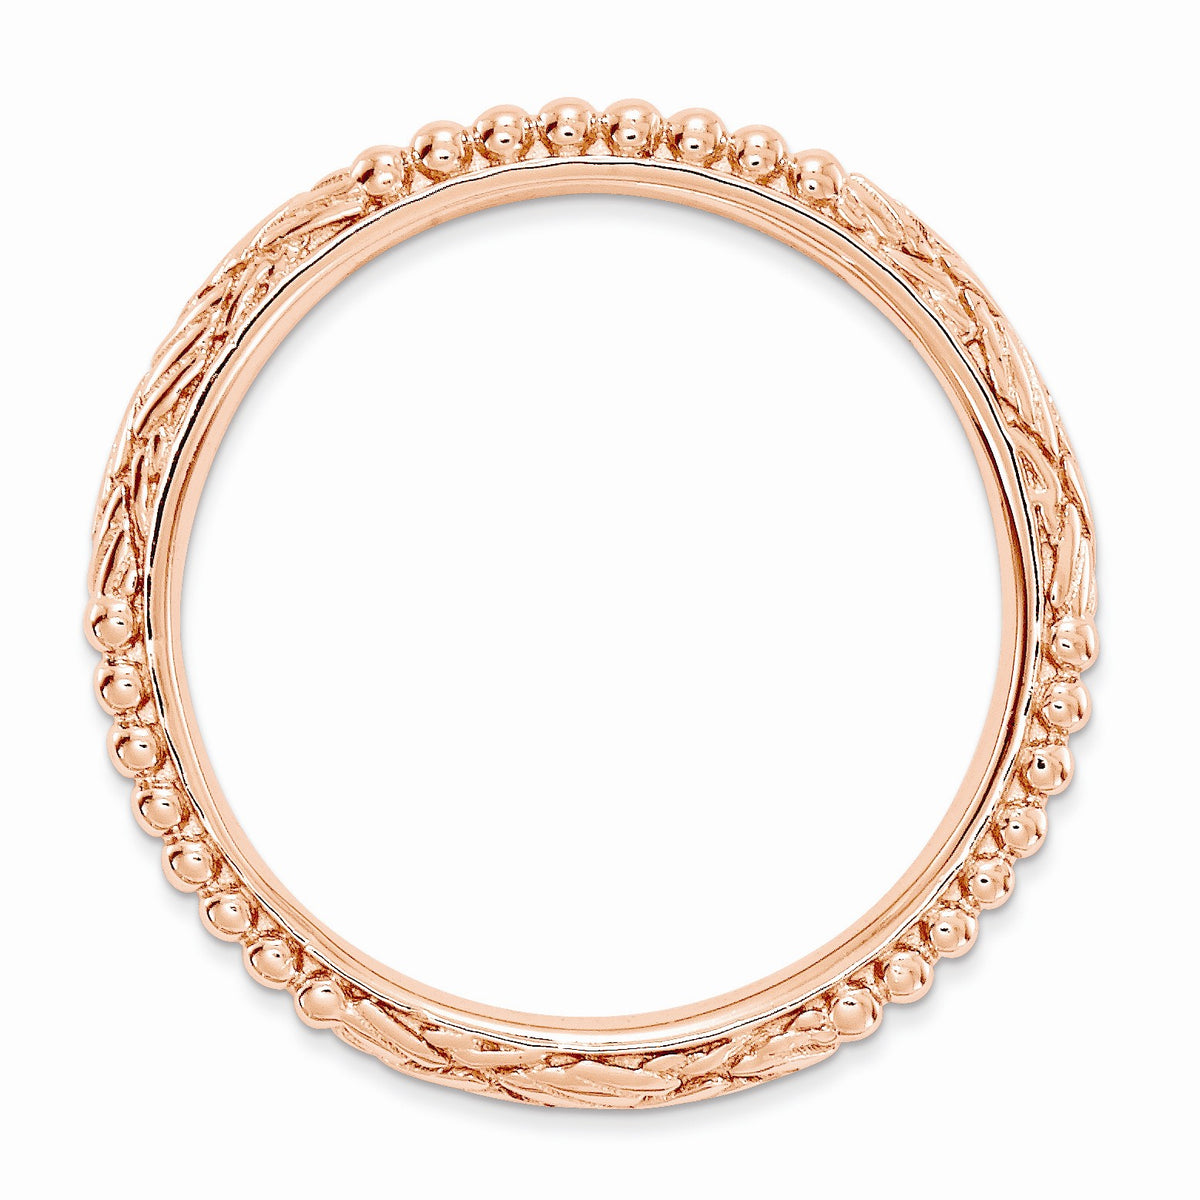 Alternate view of the 2.5mm Rose Gold Tone Plated Sterling Silver Stackable Patterned Band by The Black Bow Jewelry Co.